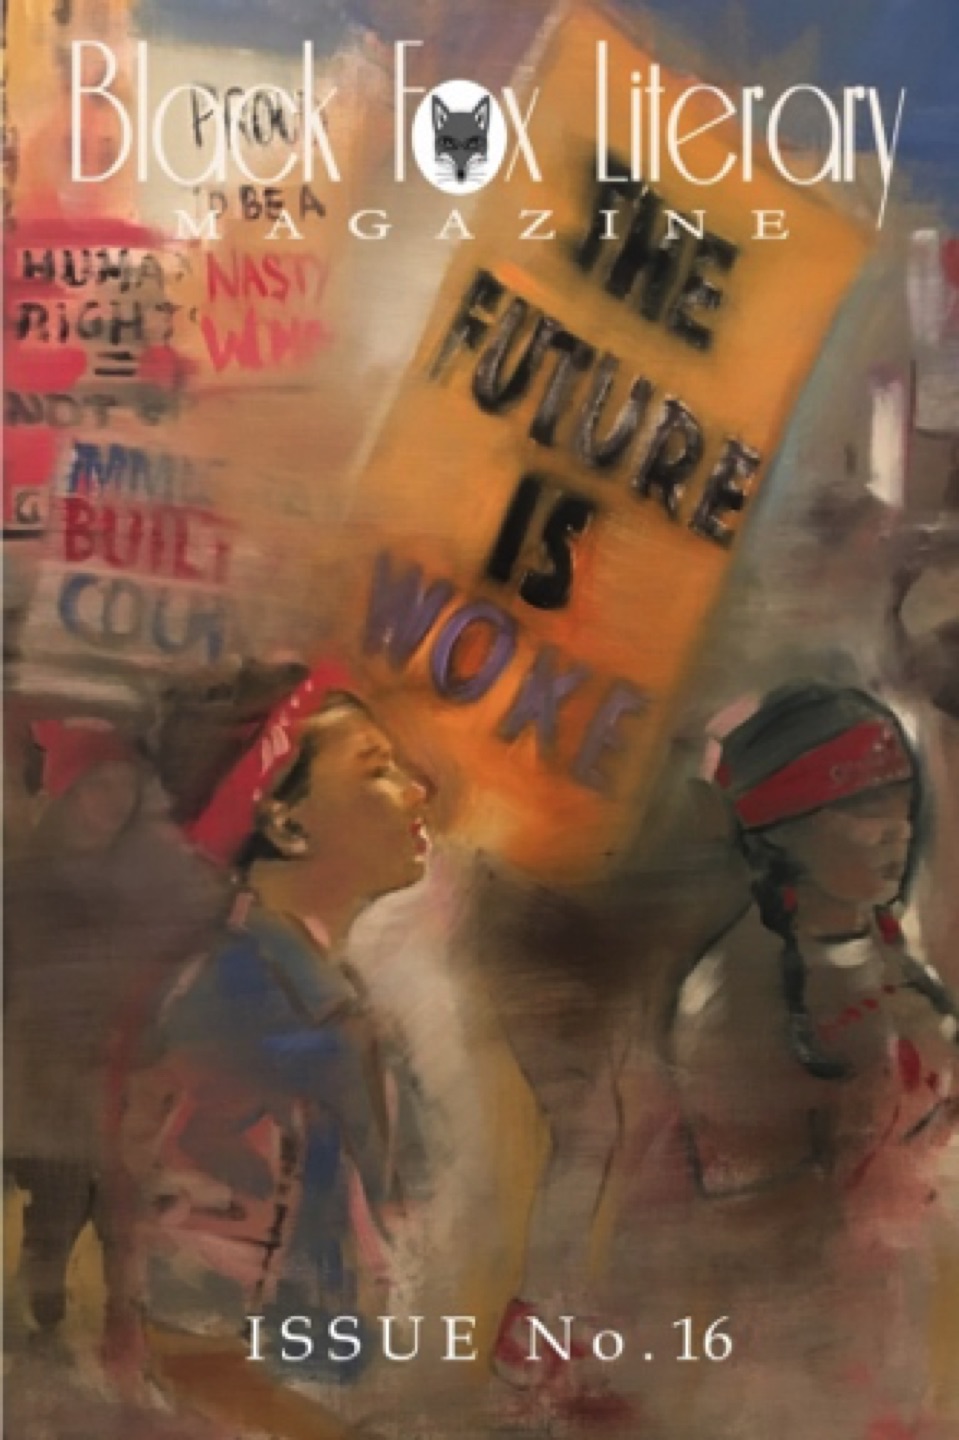 Gregg Chadwick
The Future Is Woke
40"x30" oil on linen 2017
Featured on the Cover of Black Fox Literary Magazine, Issue No. 16